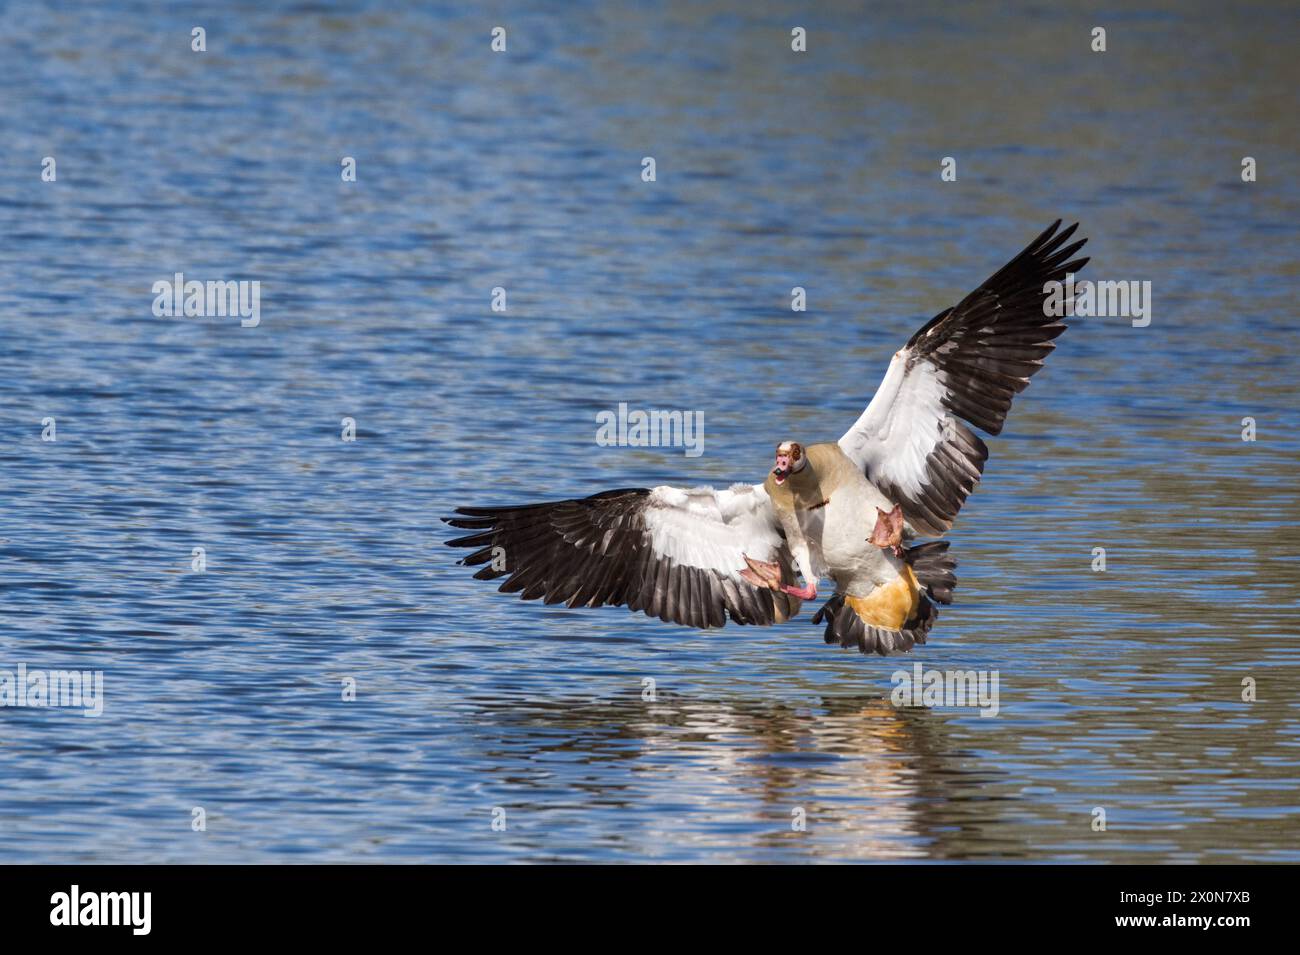 Male Egyptian goose with wings spread and legs up as it is almost ready to land on the water at a crazy angle Stock Photo